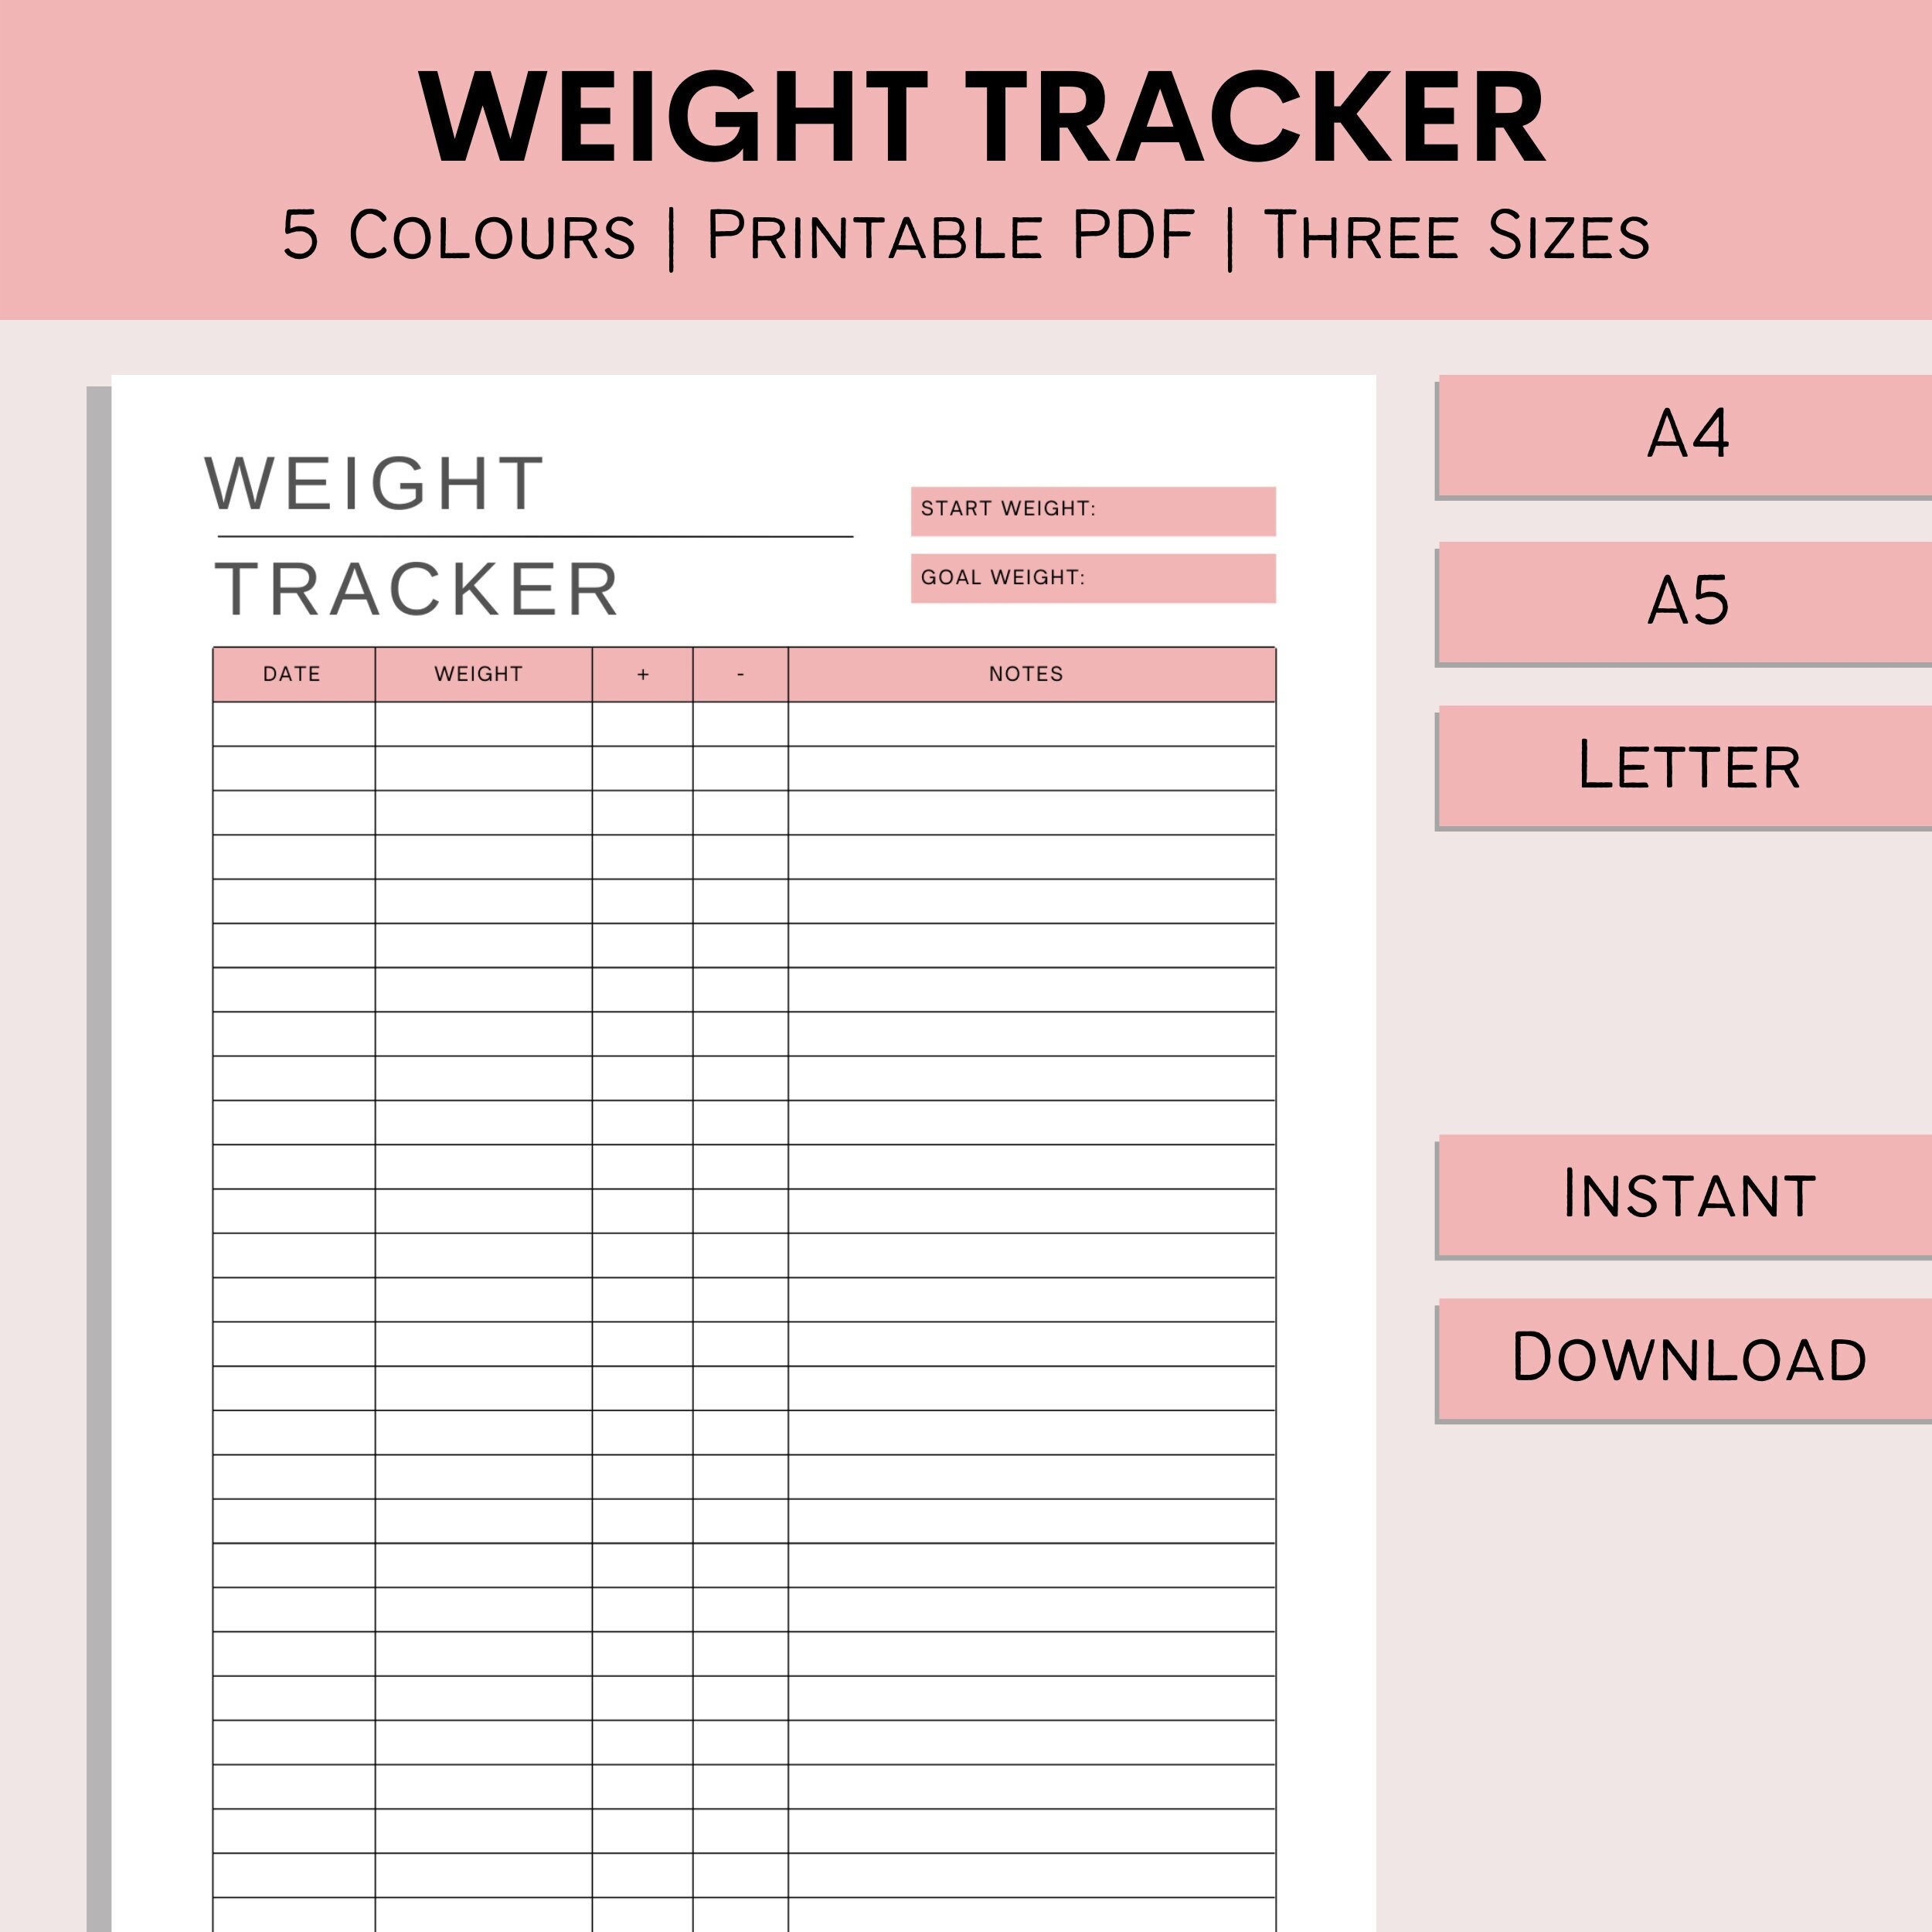 Weight Tracker Printable Weight Loss Log Health Journey Fitness Recorder  Weight Loss Sheet PDF A4 A5 Letter 